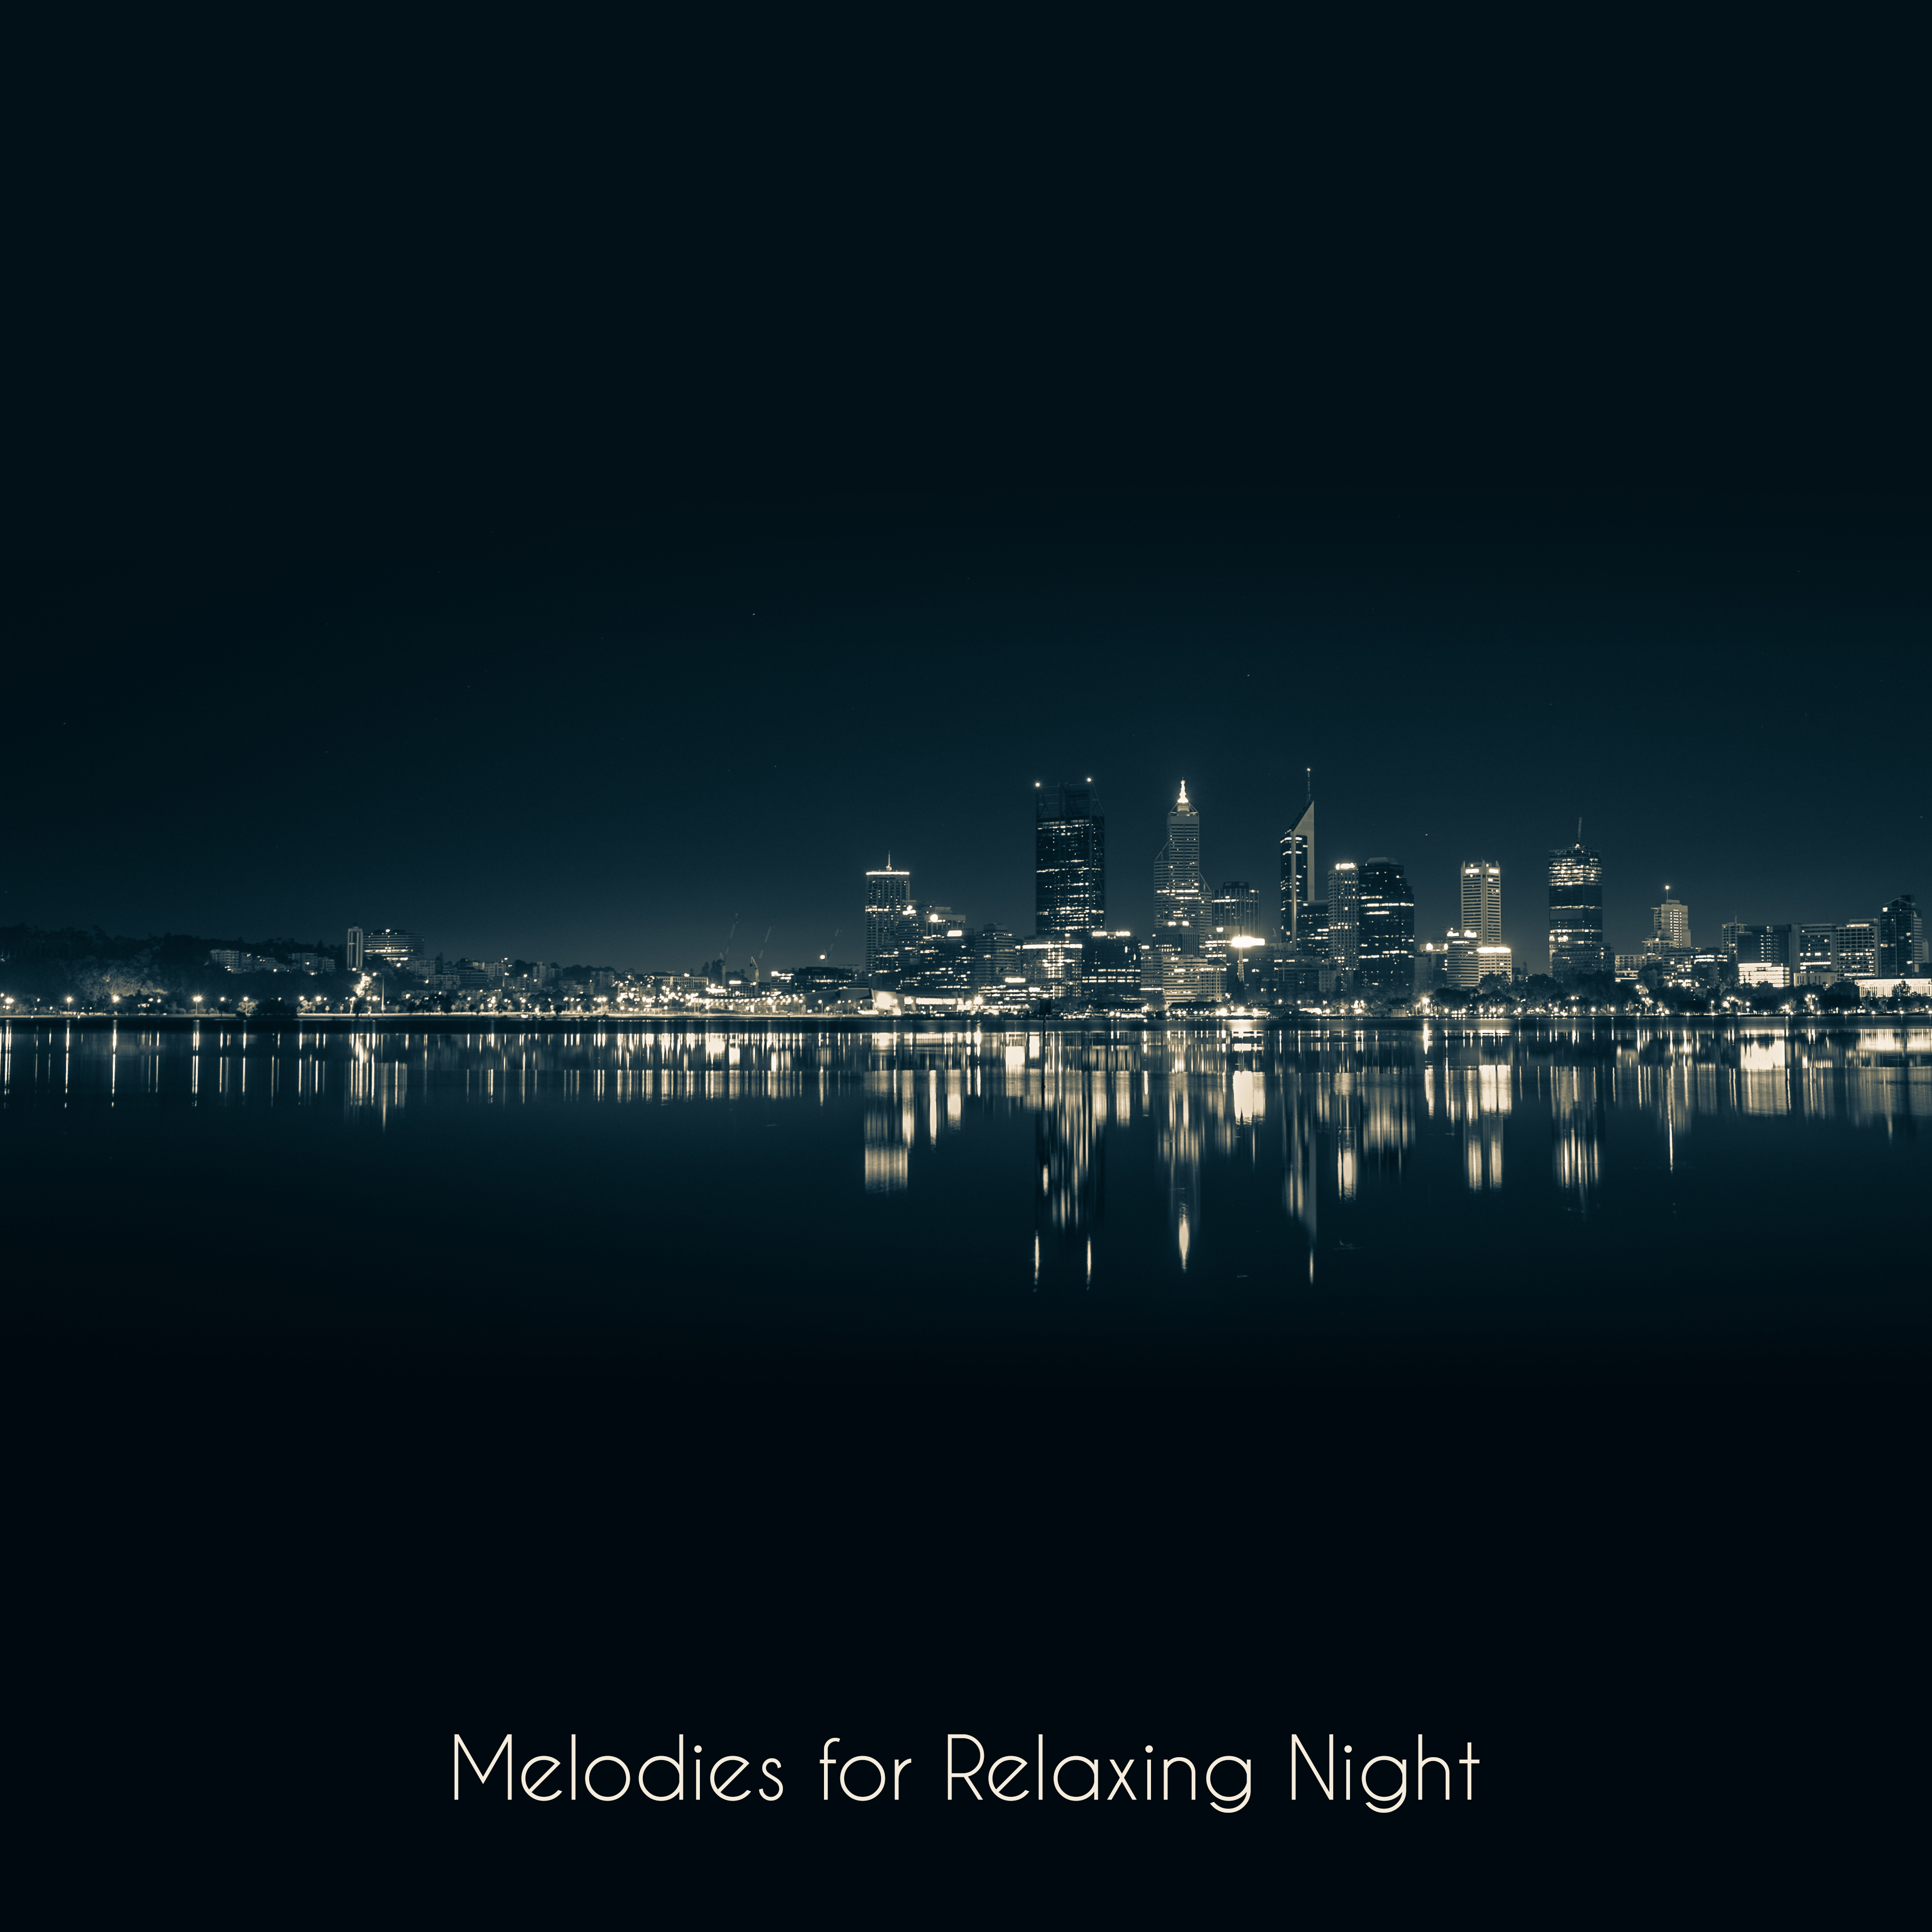 Melodies for Relaxing Night